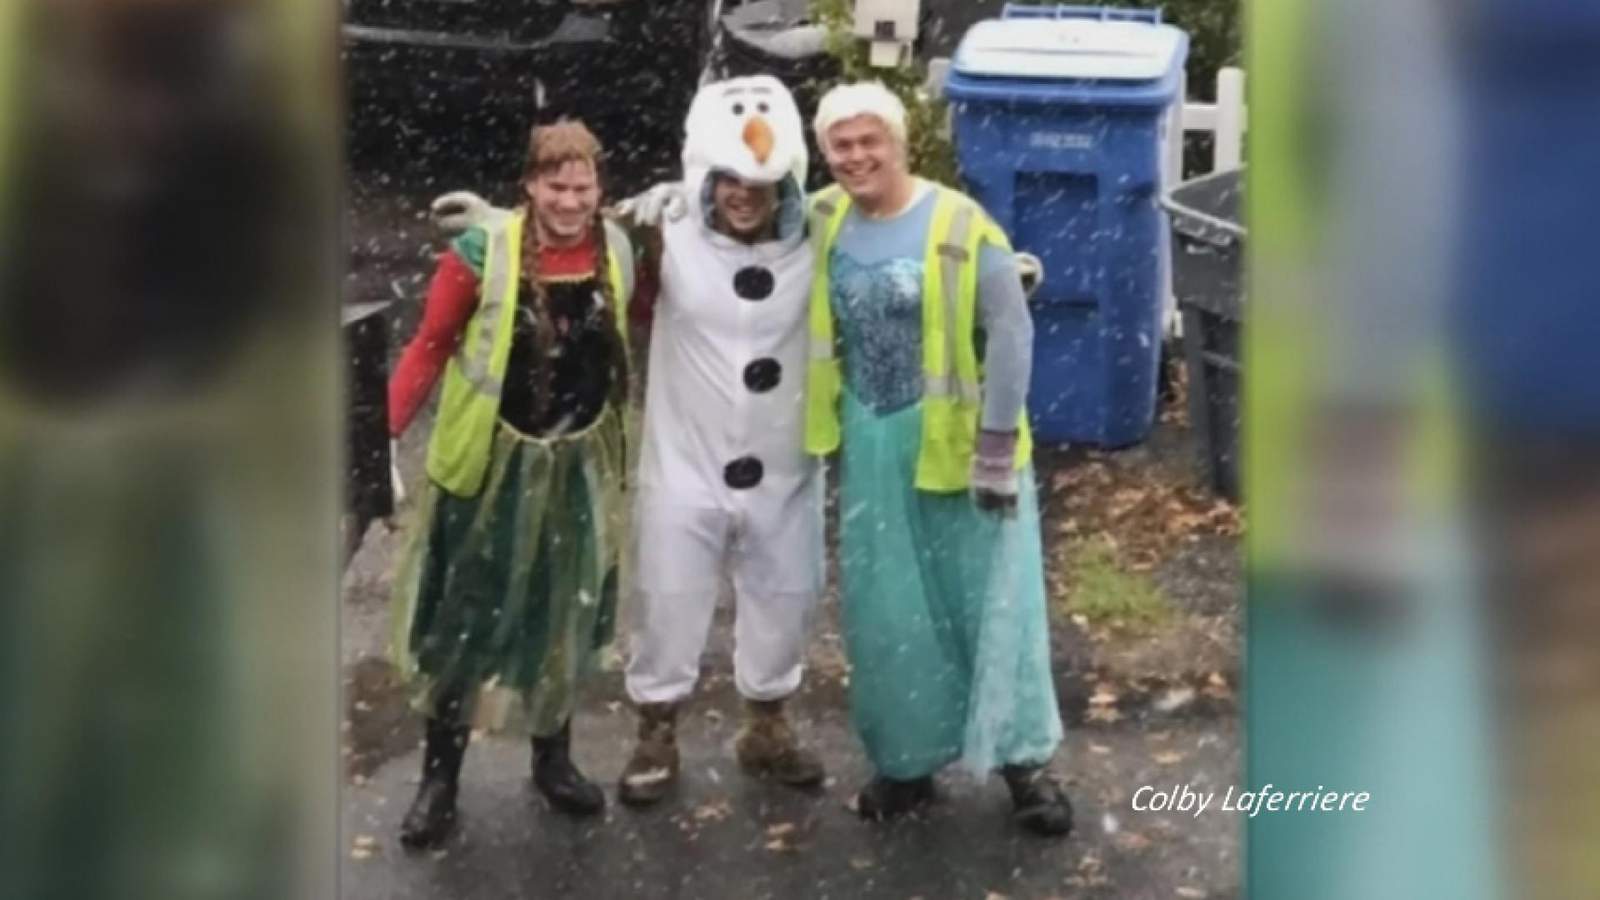 What the Elsa? Sanitation workers dress up as ‘Frozen’ characters to delight neighborhood kids